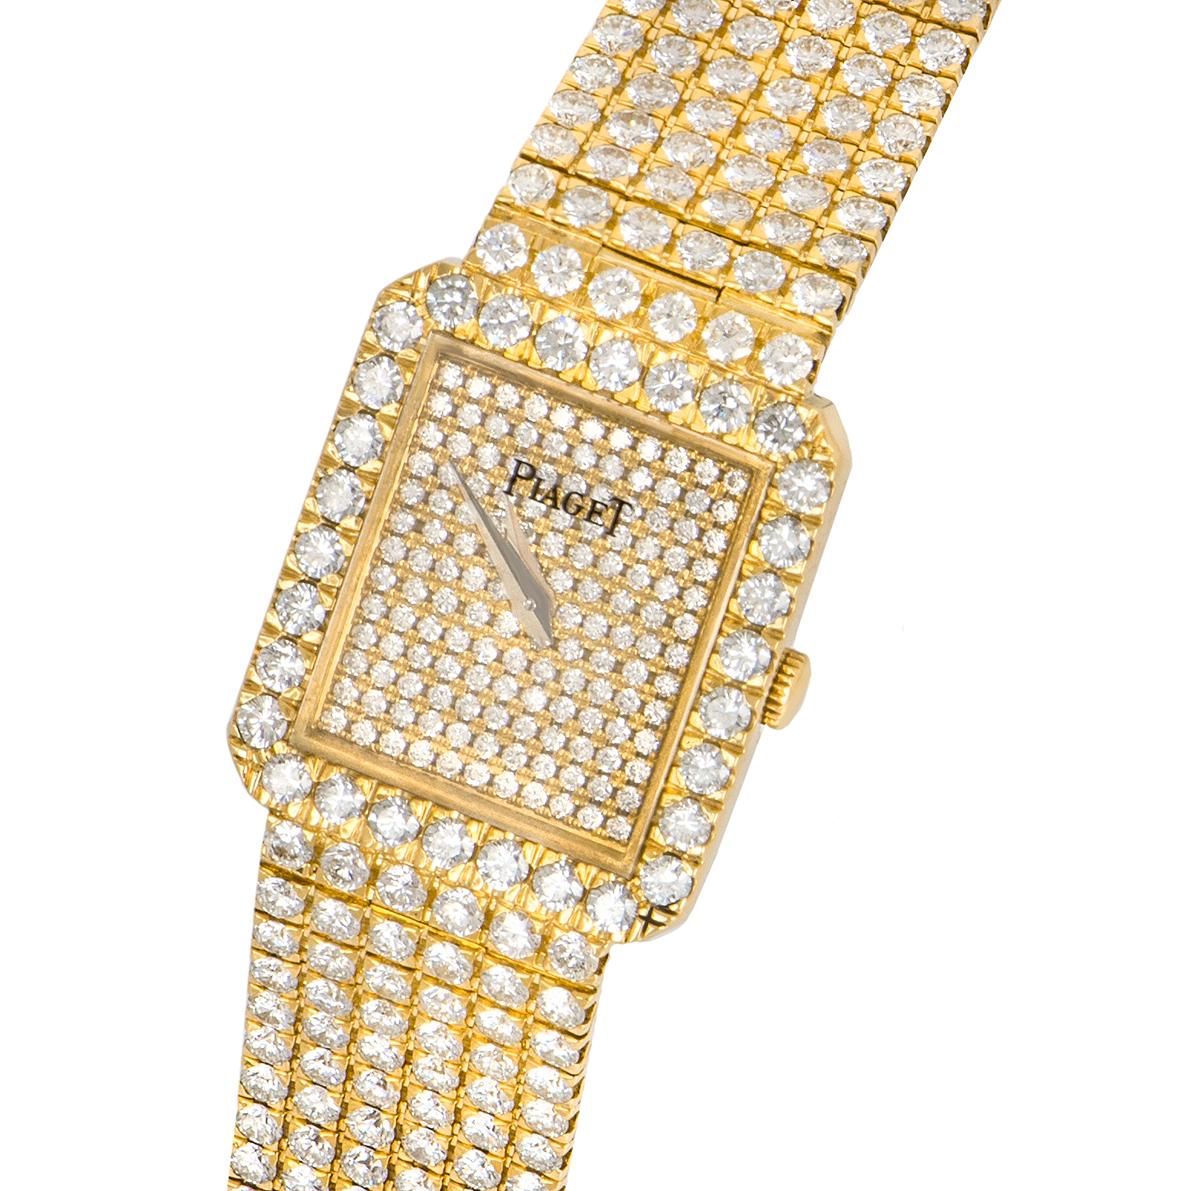 piaget gold watch with diamonds